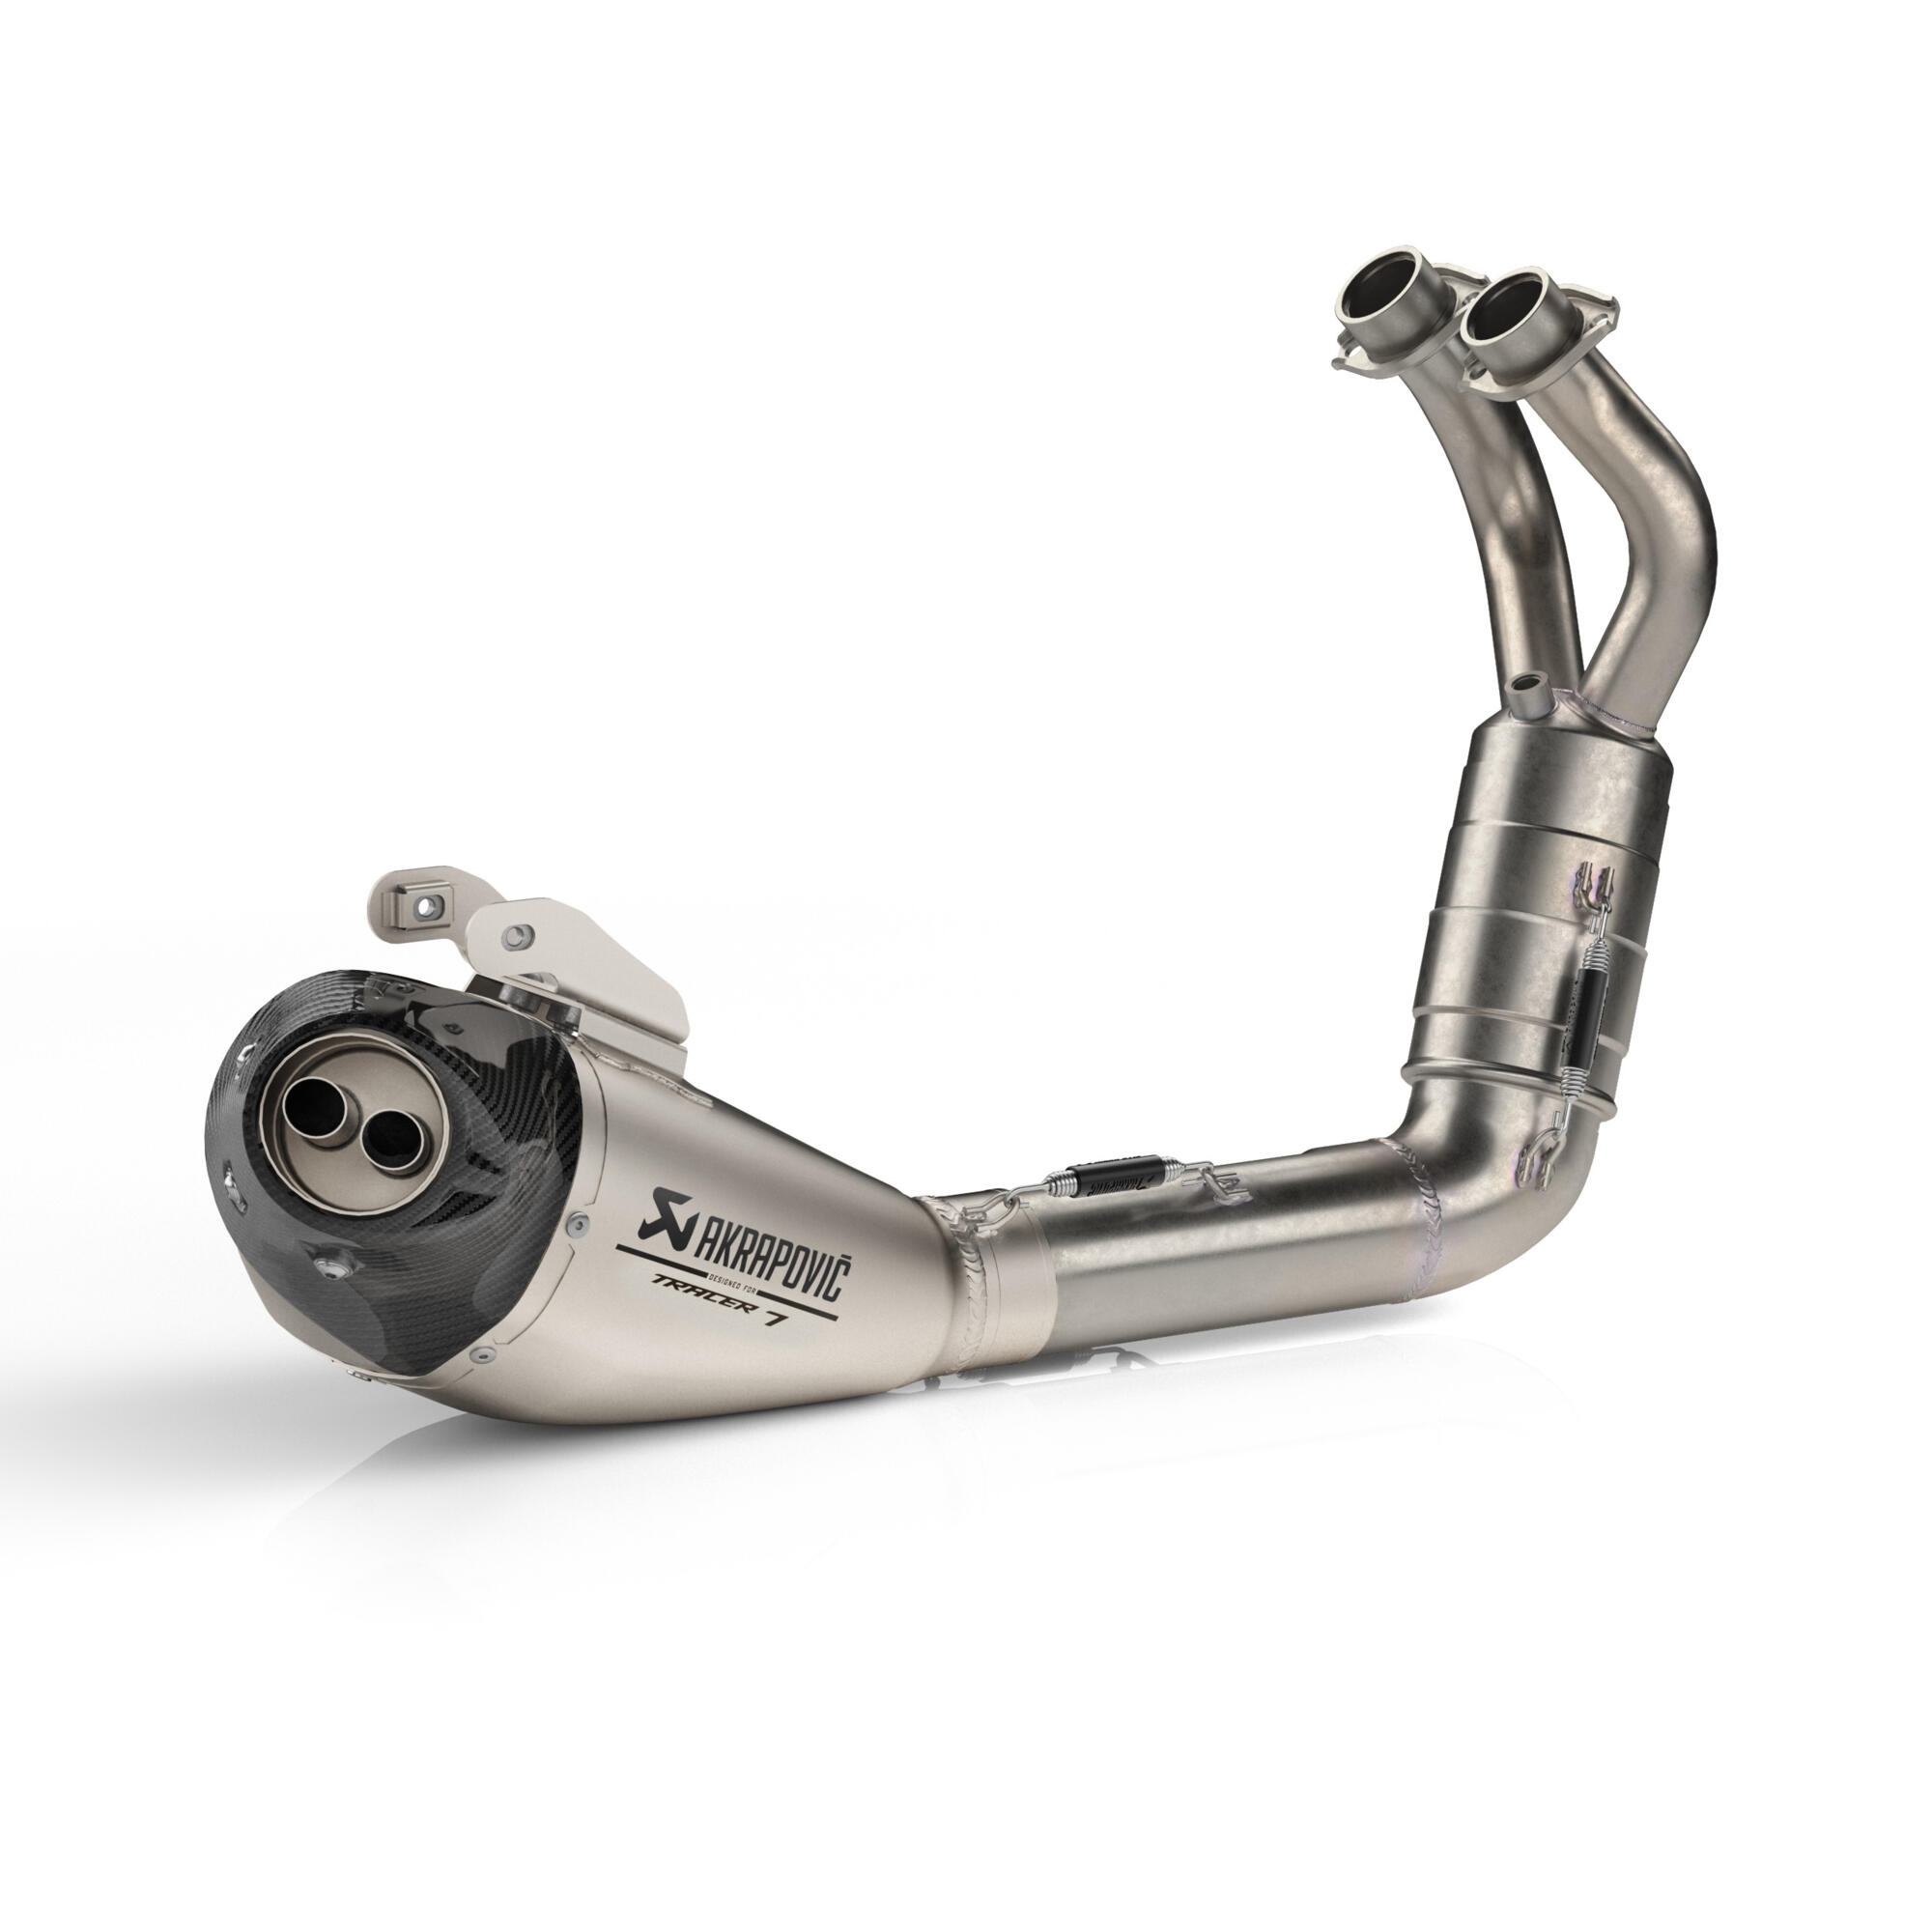 Full exhaust system for TRACER 7 - Accessories - Yamaha Motor